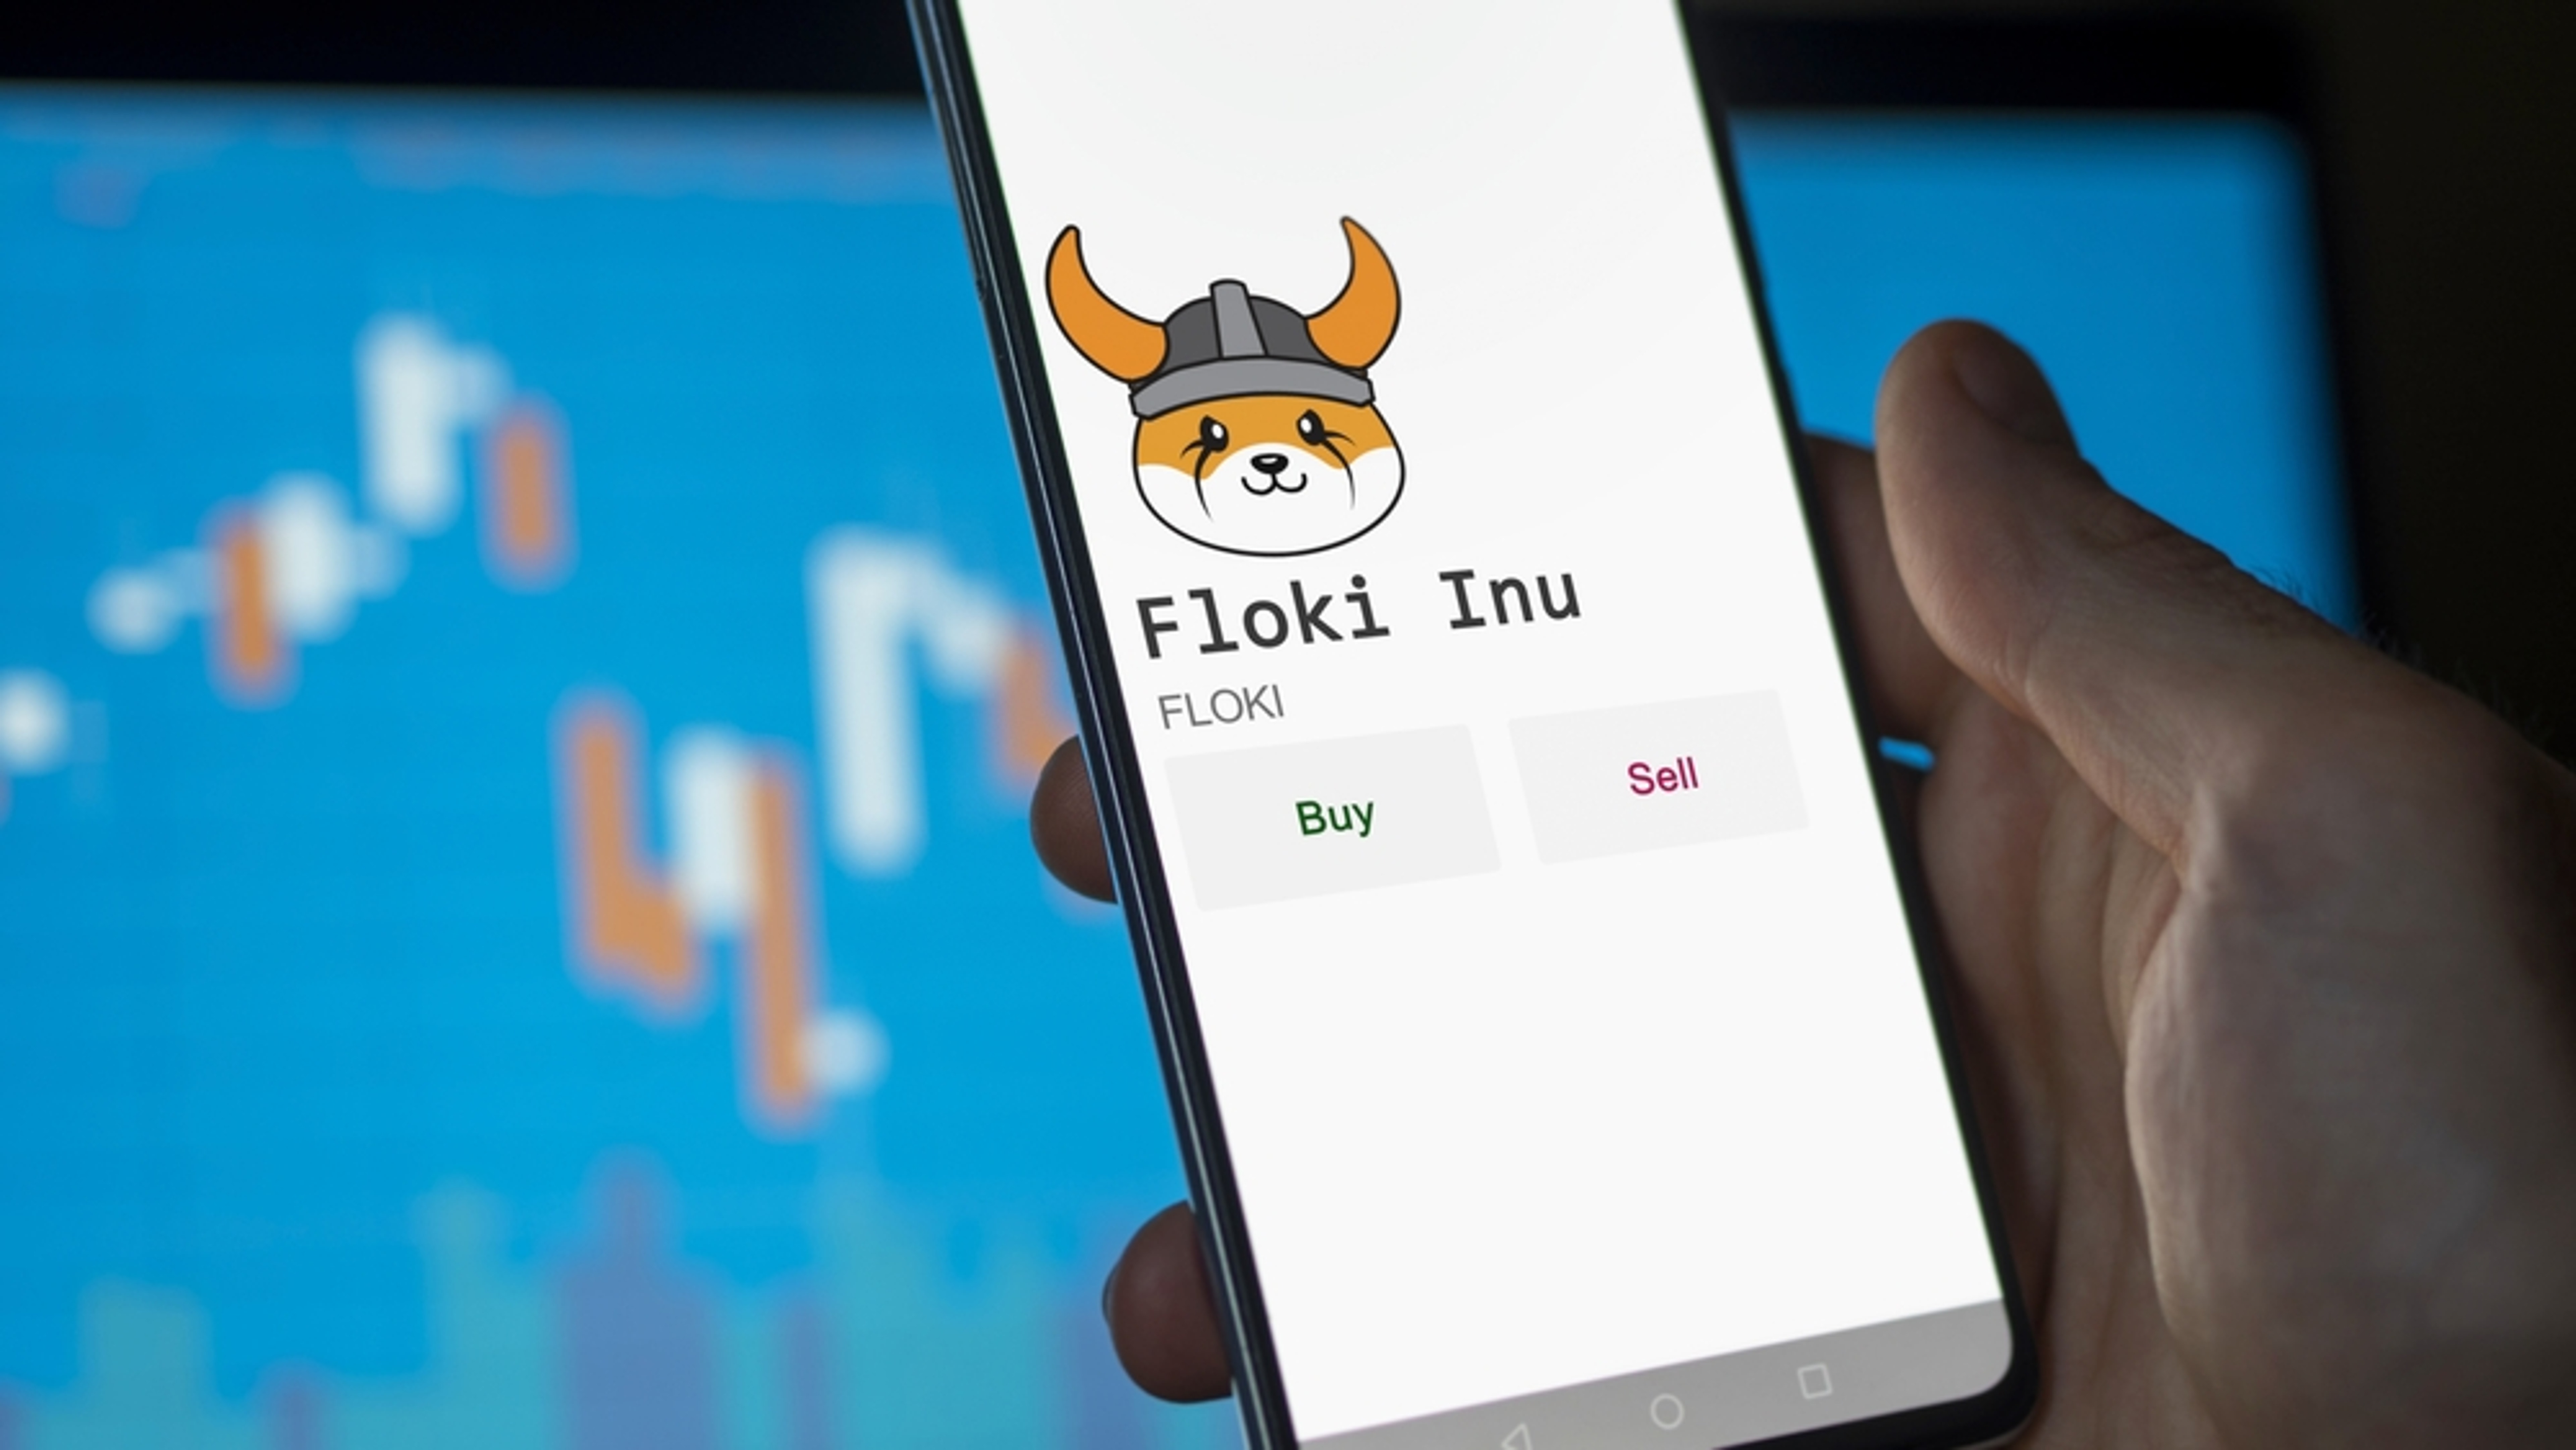 Floki Outperforms Dogecoin, Shiba Inu With 5% Gains On New Exchange Listing News